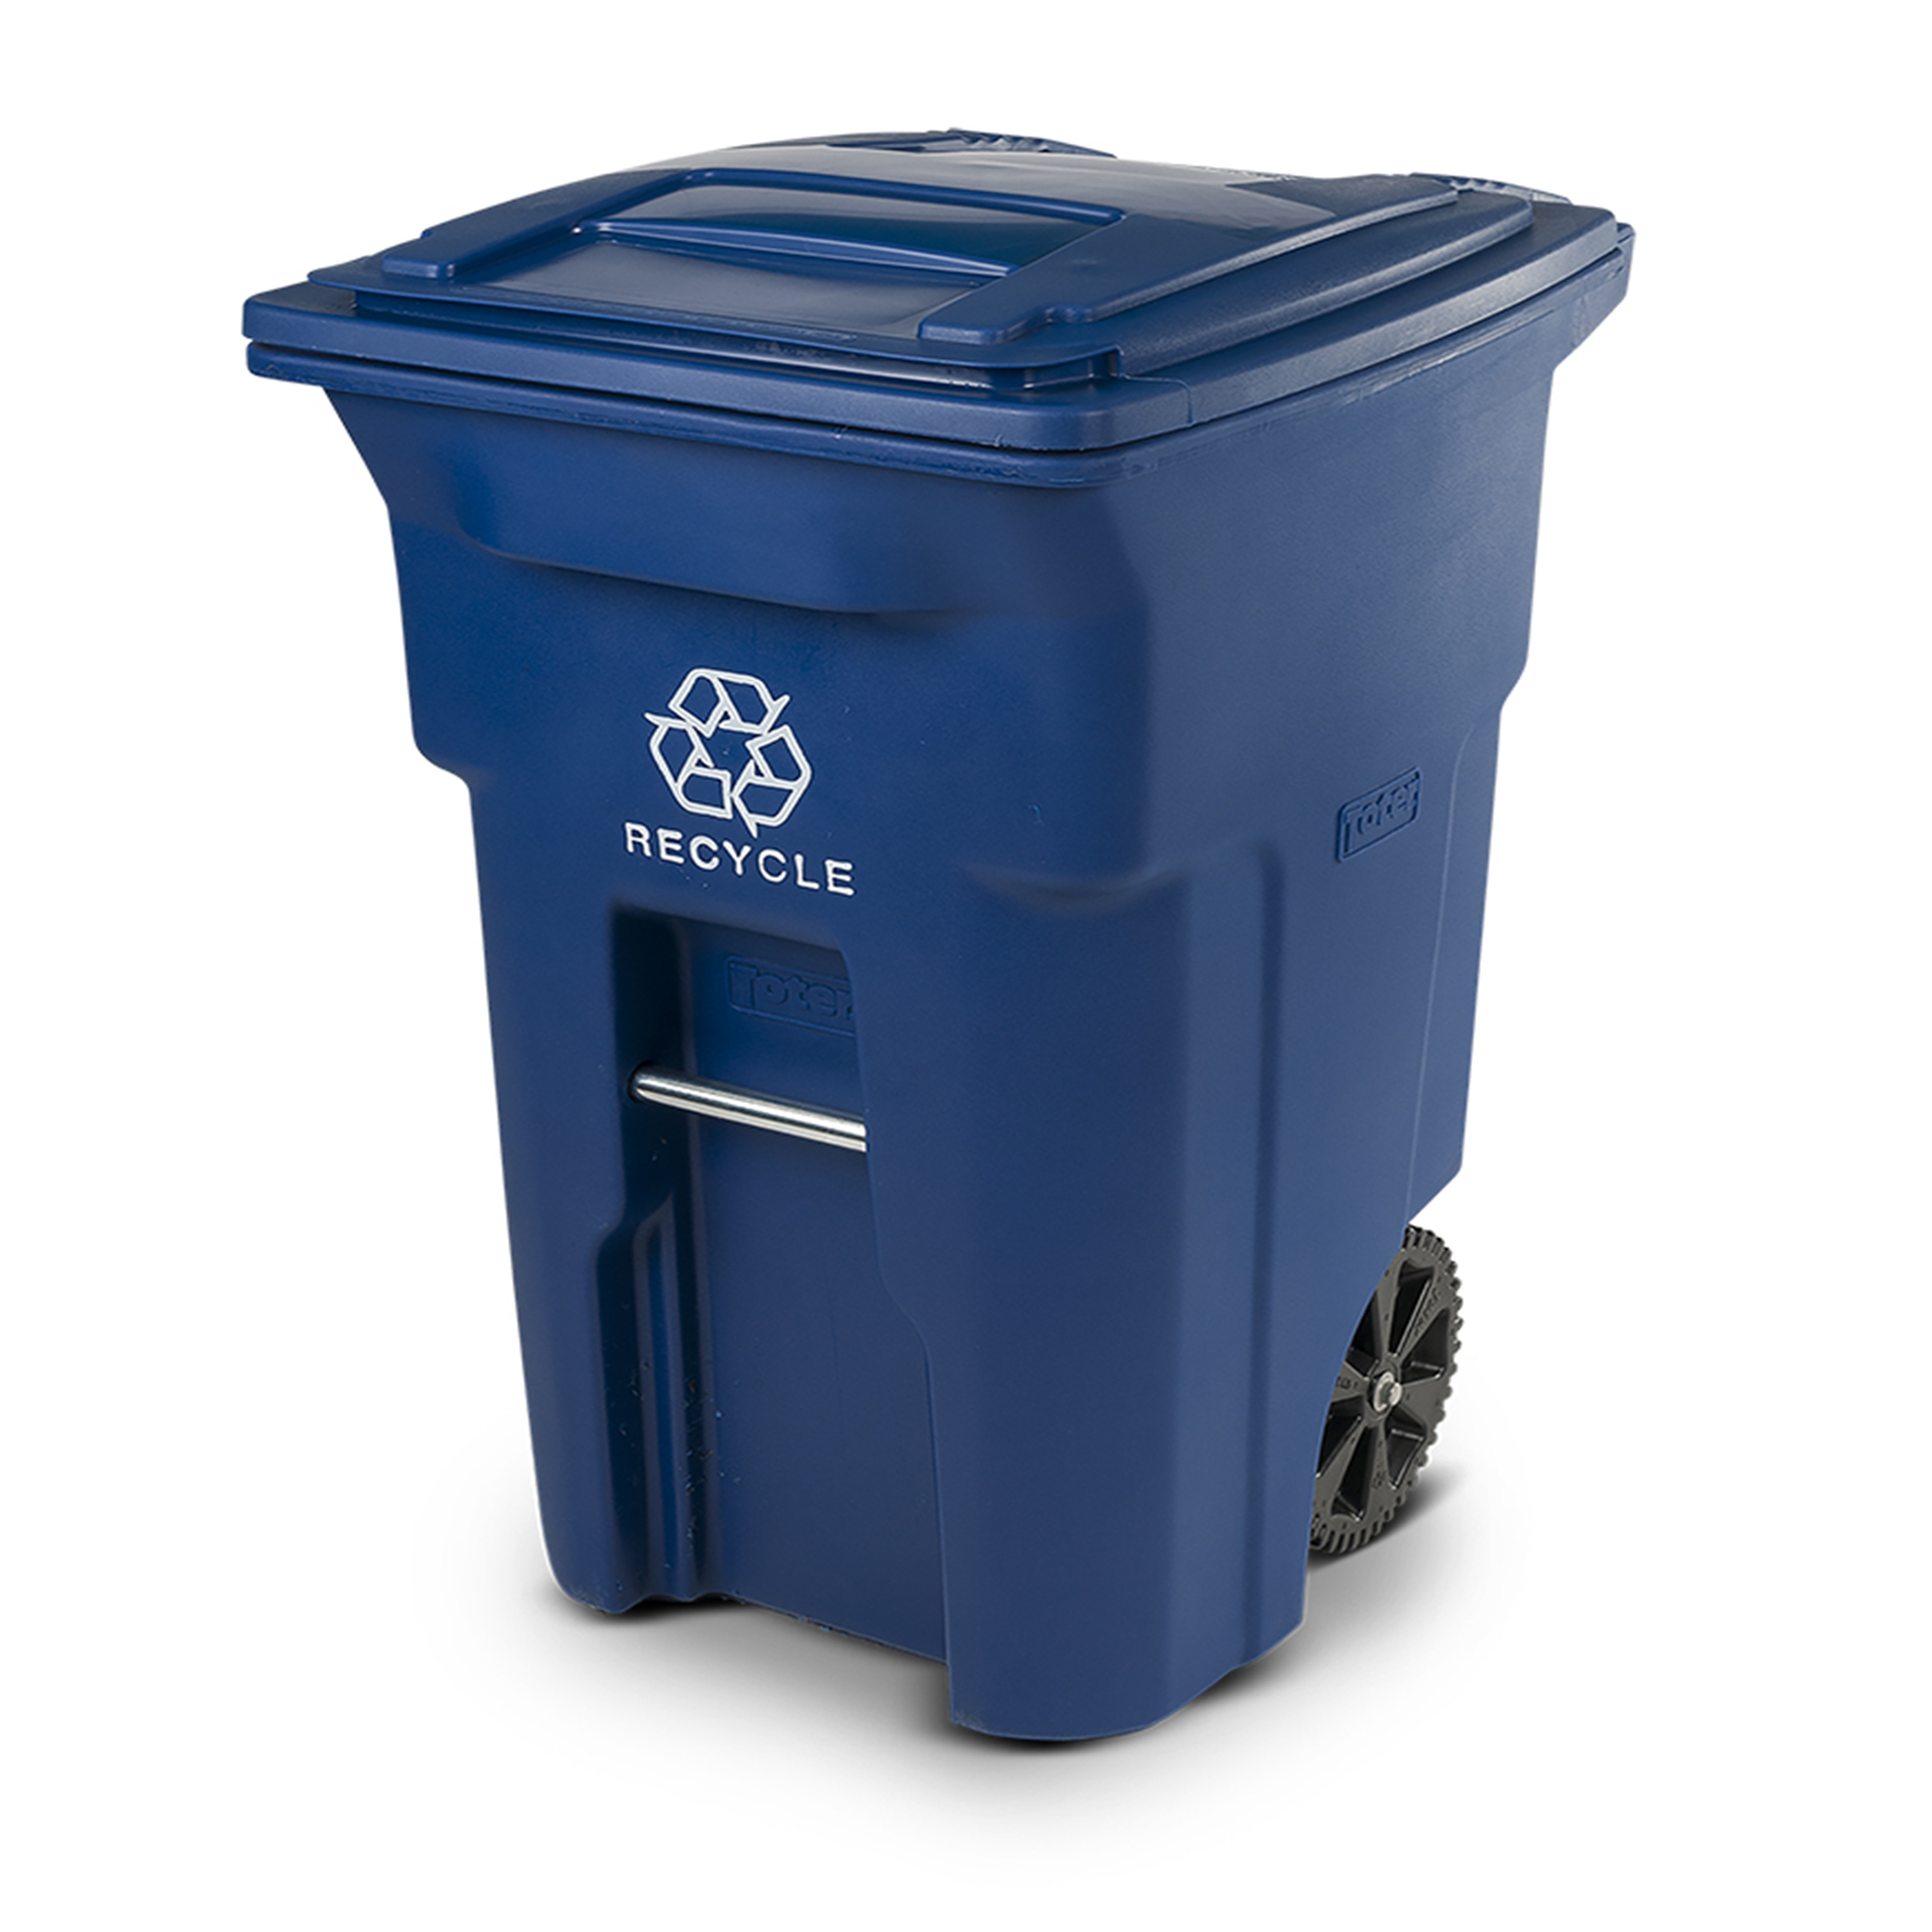 https://www.toter.com/sites/default/files/2021-05/Toter_96Gallon_TwoWheelRecycle_Blue_25596_Main.png